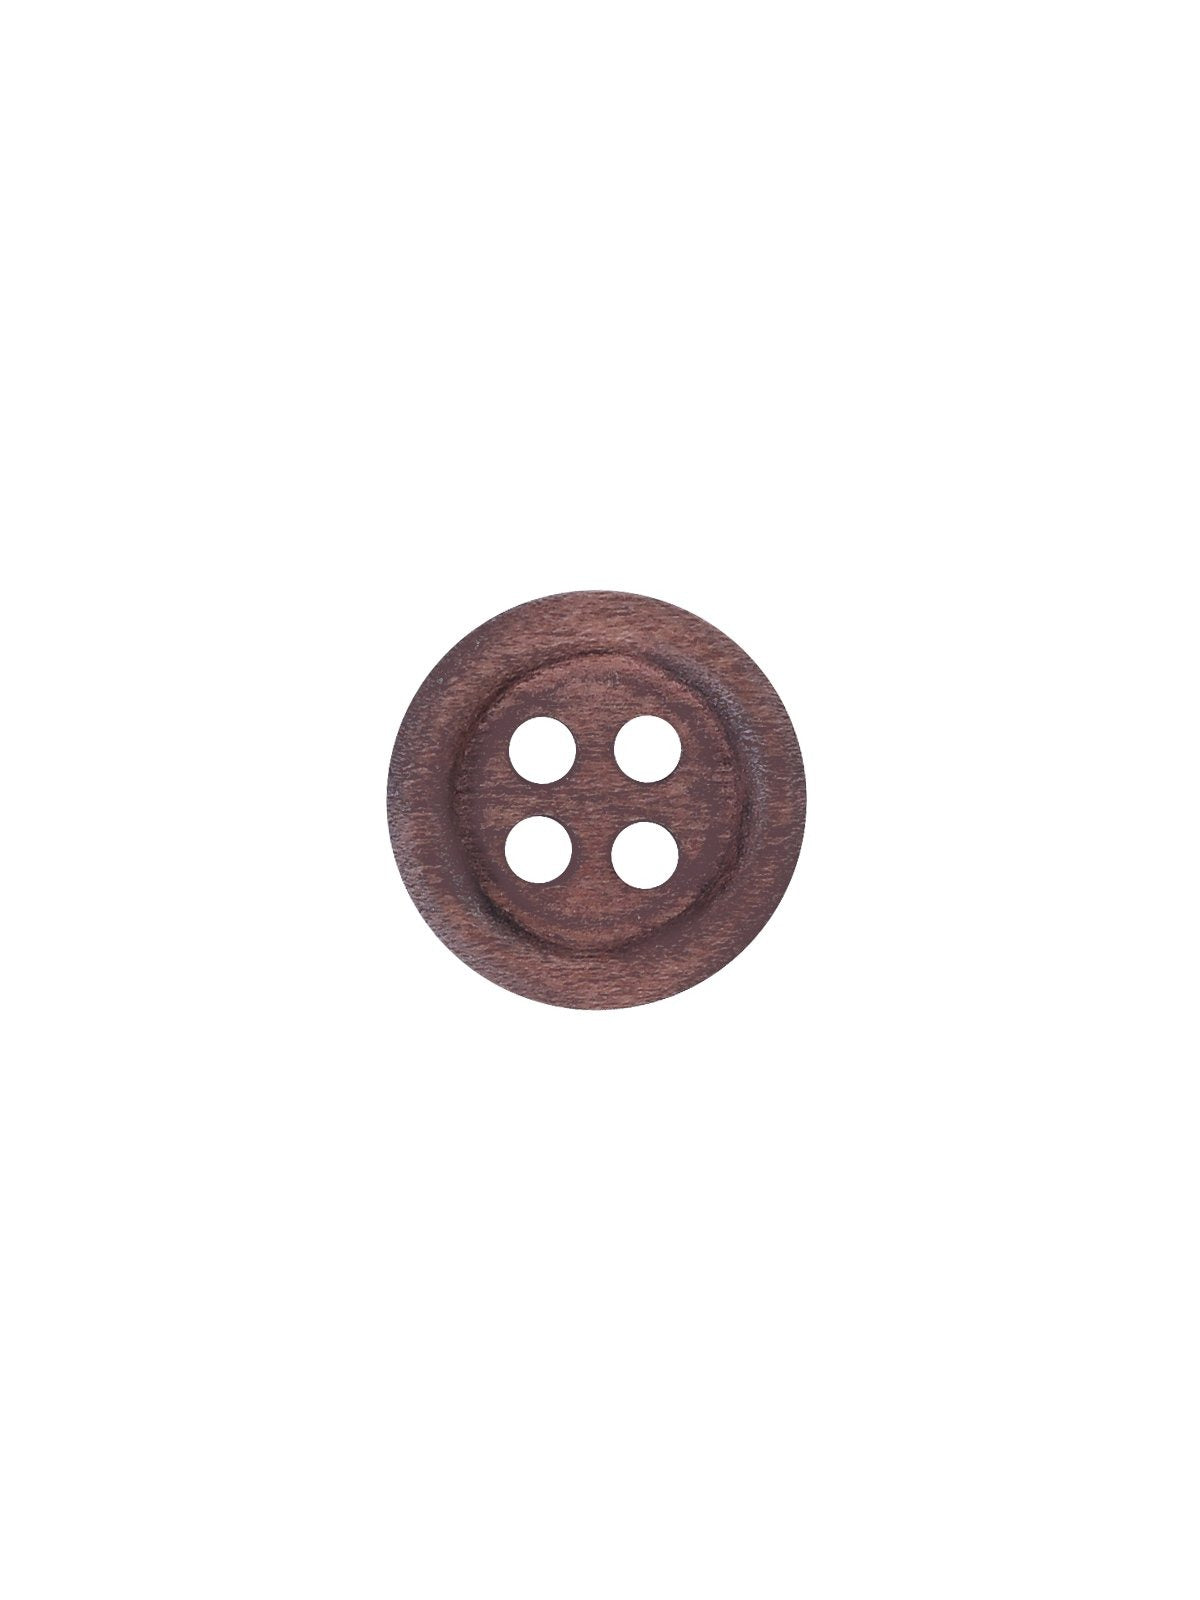 Rounded Rim 4-Hole Brown Wooden Button